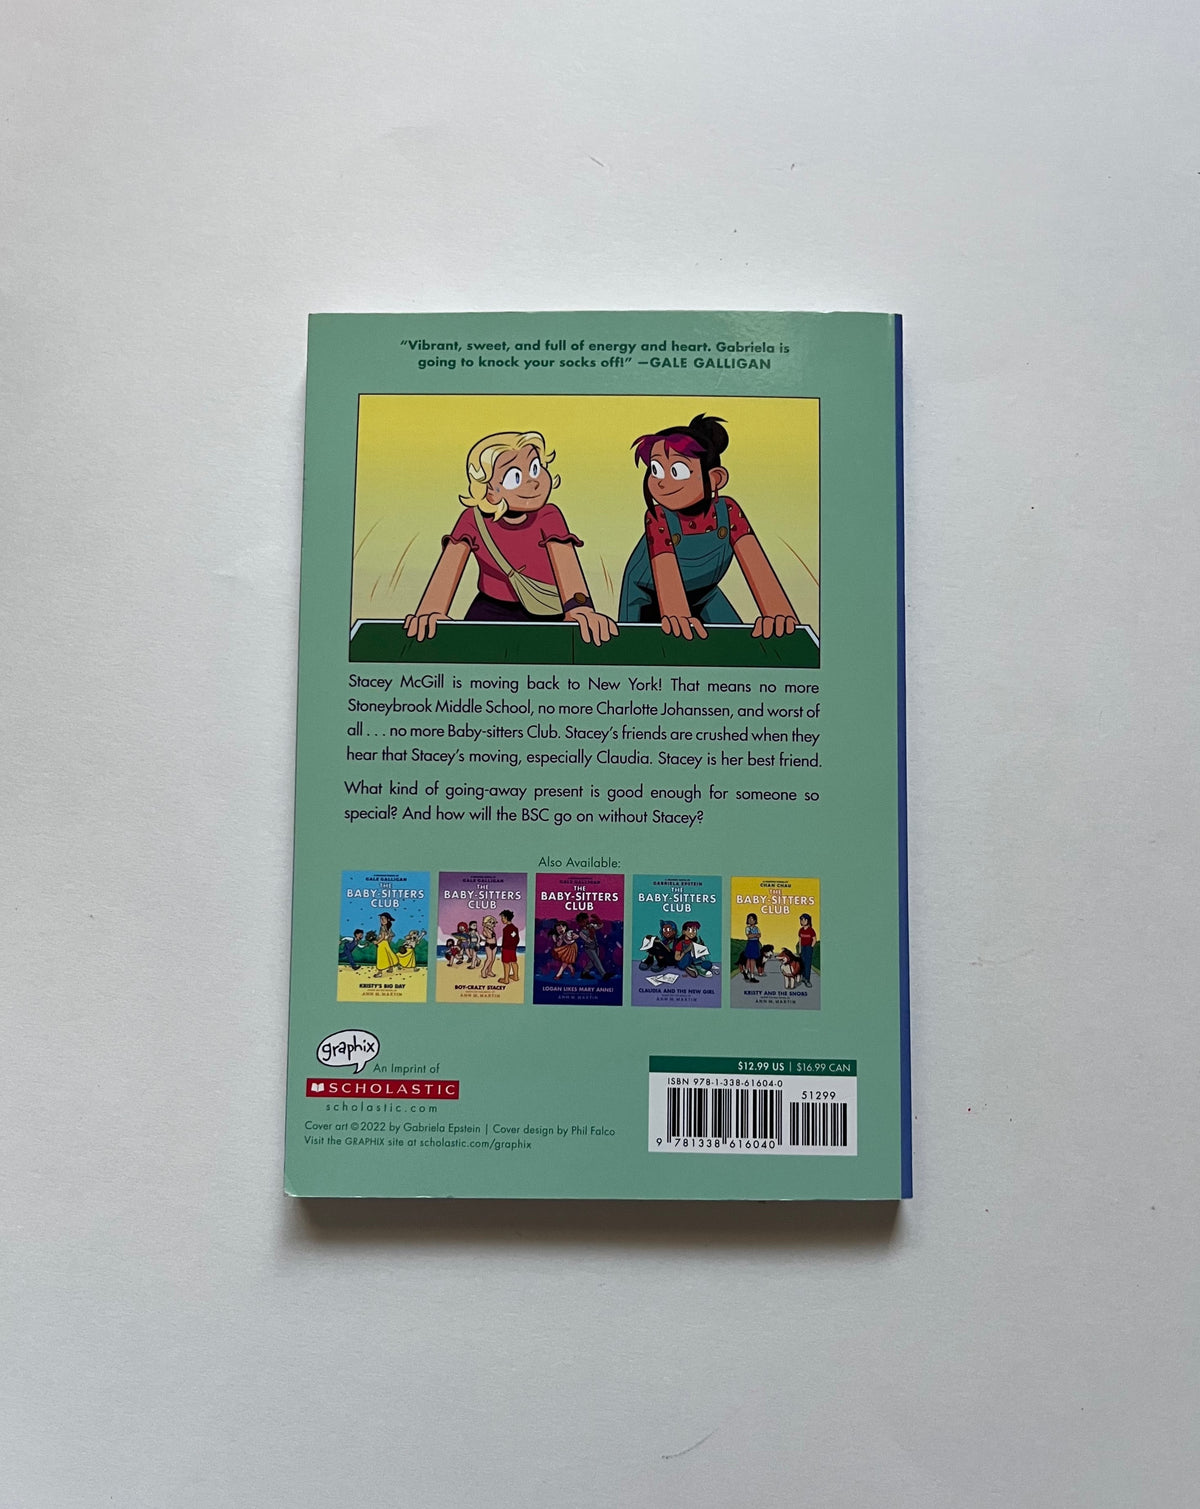 The Baby-Sitters Club: Good-Bye Stacey, Good-Bye by Ann M. Martin